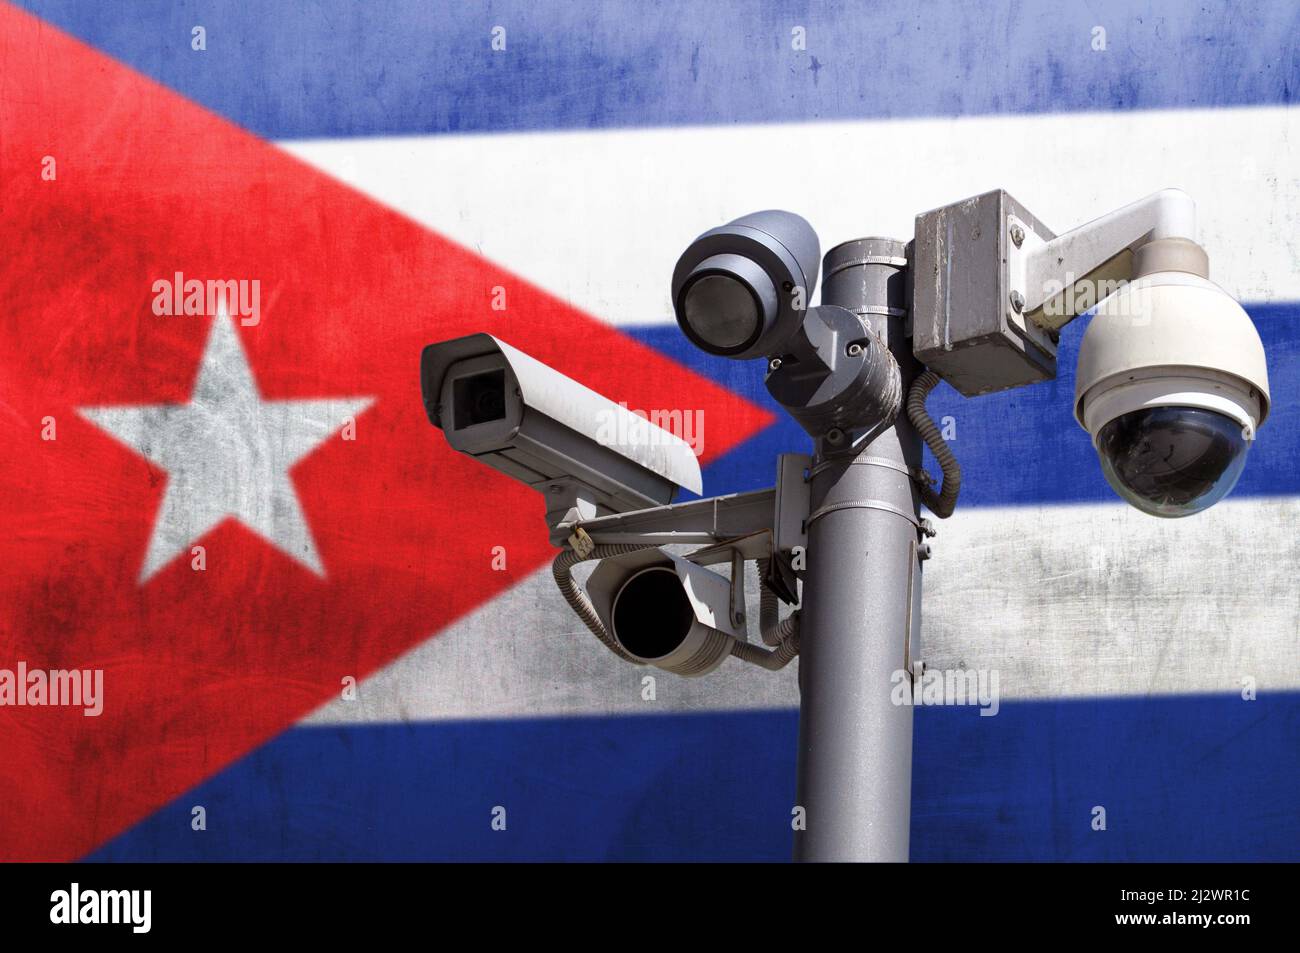 Closed circuit camera Multi-angle CCTV system against the background of the national flag of Cuba. Stock Photo